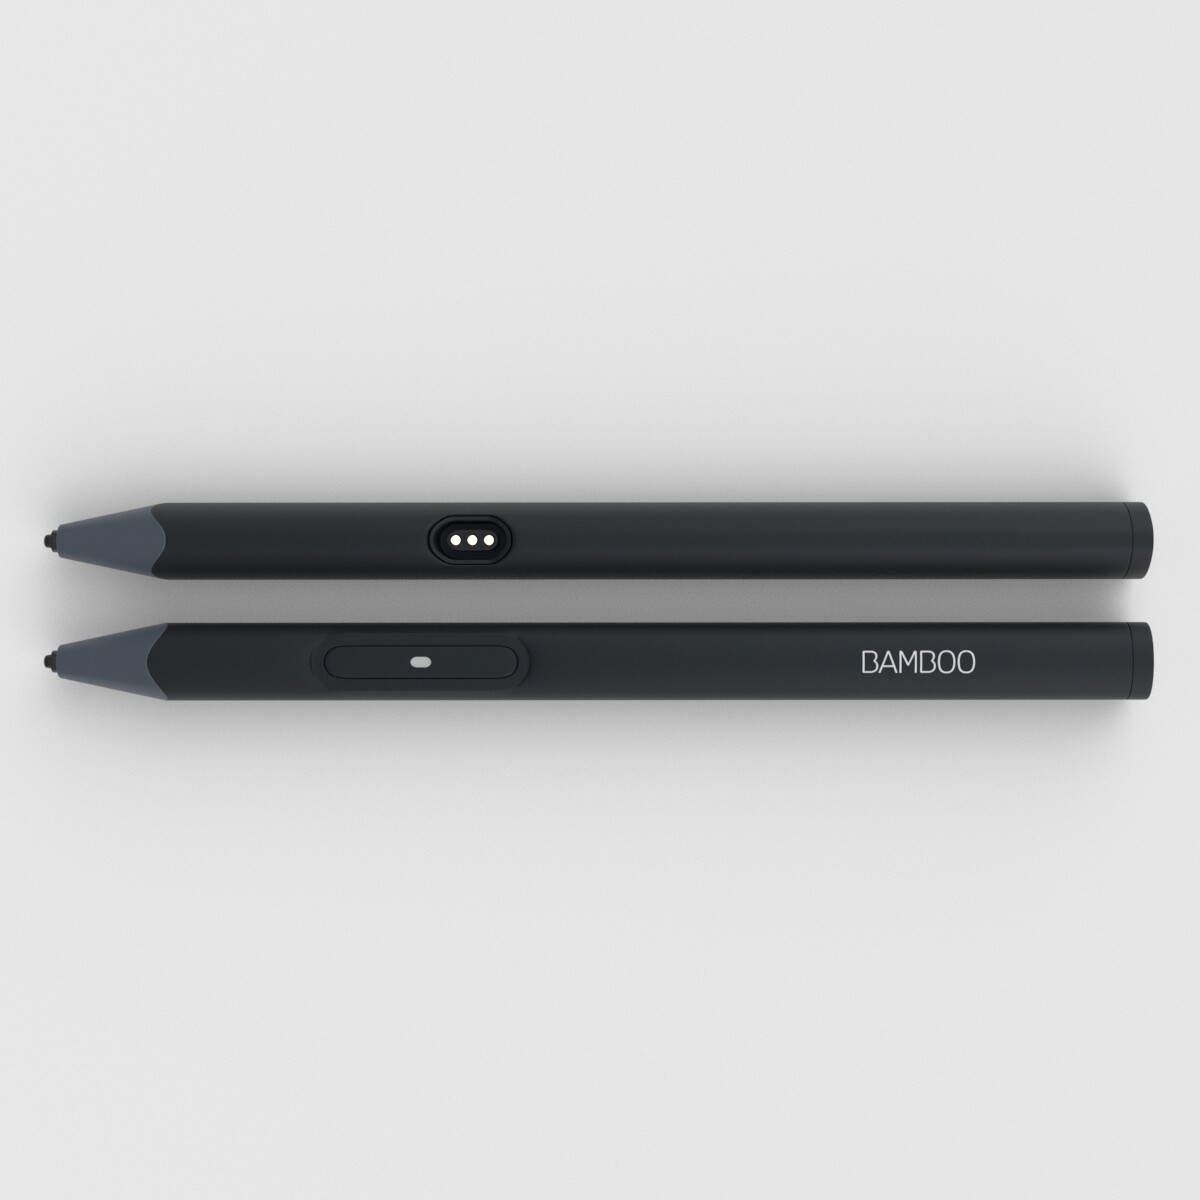 Wacom Bamboo outline Natural Sketch Black stylus for iPad and iPhone